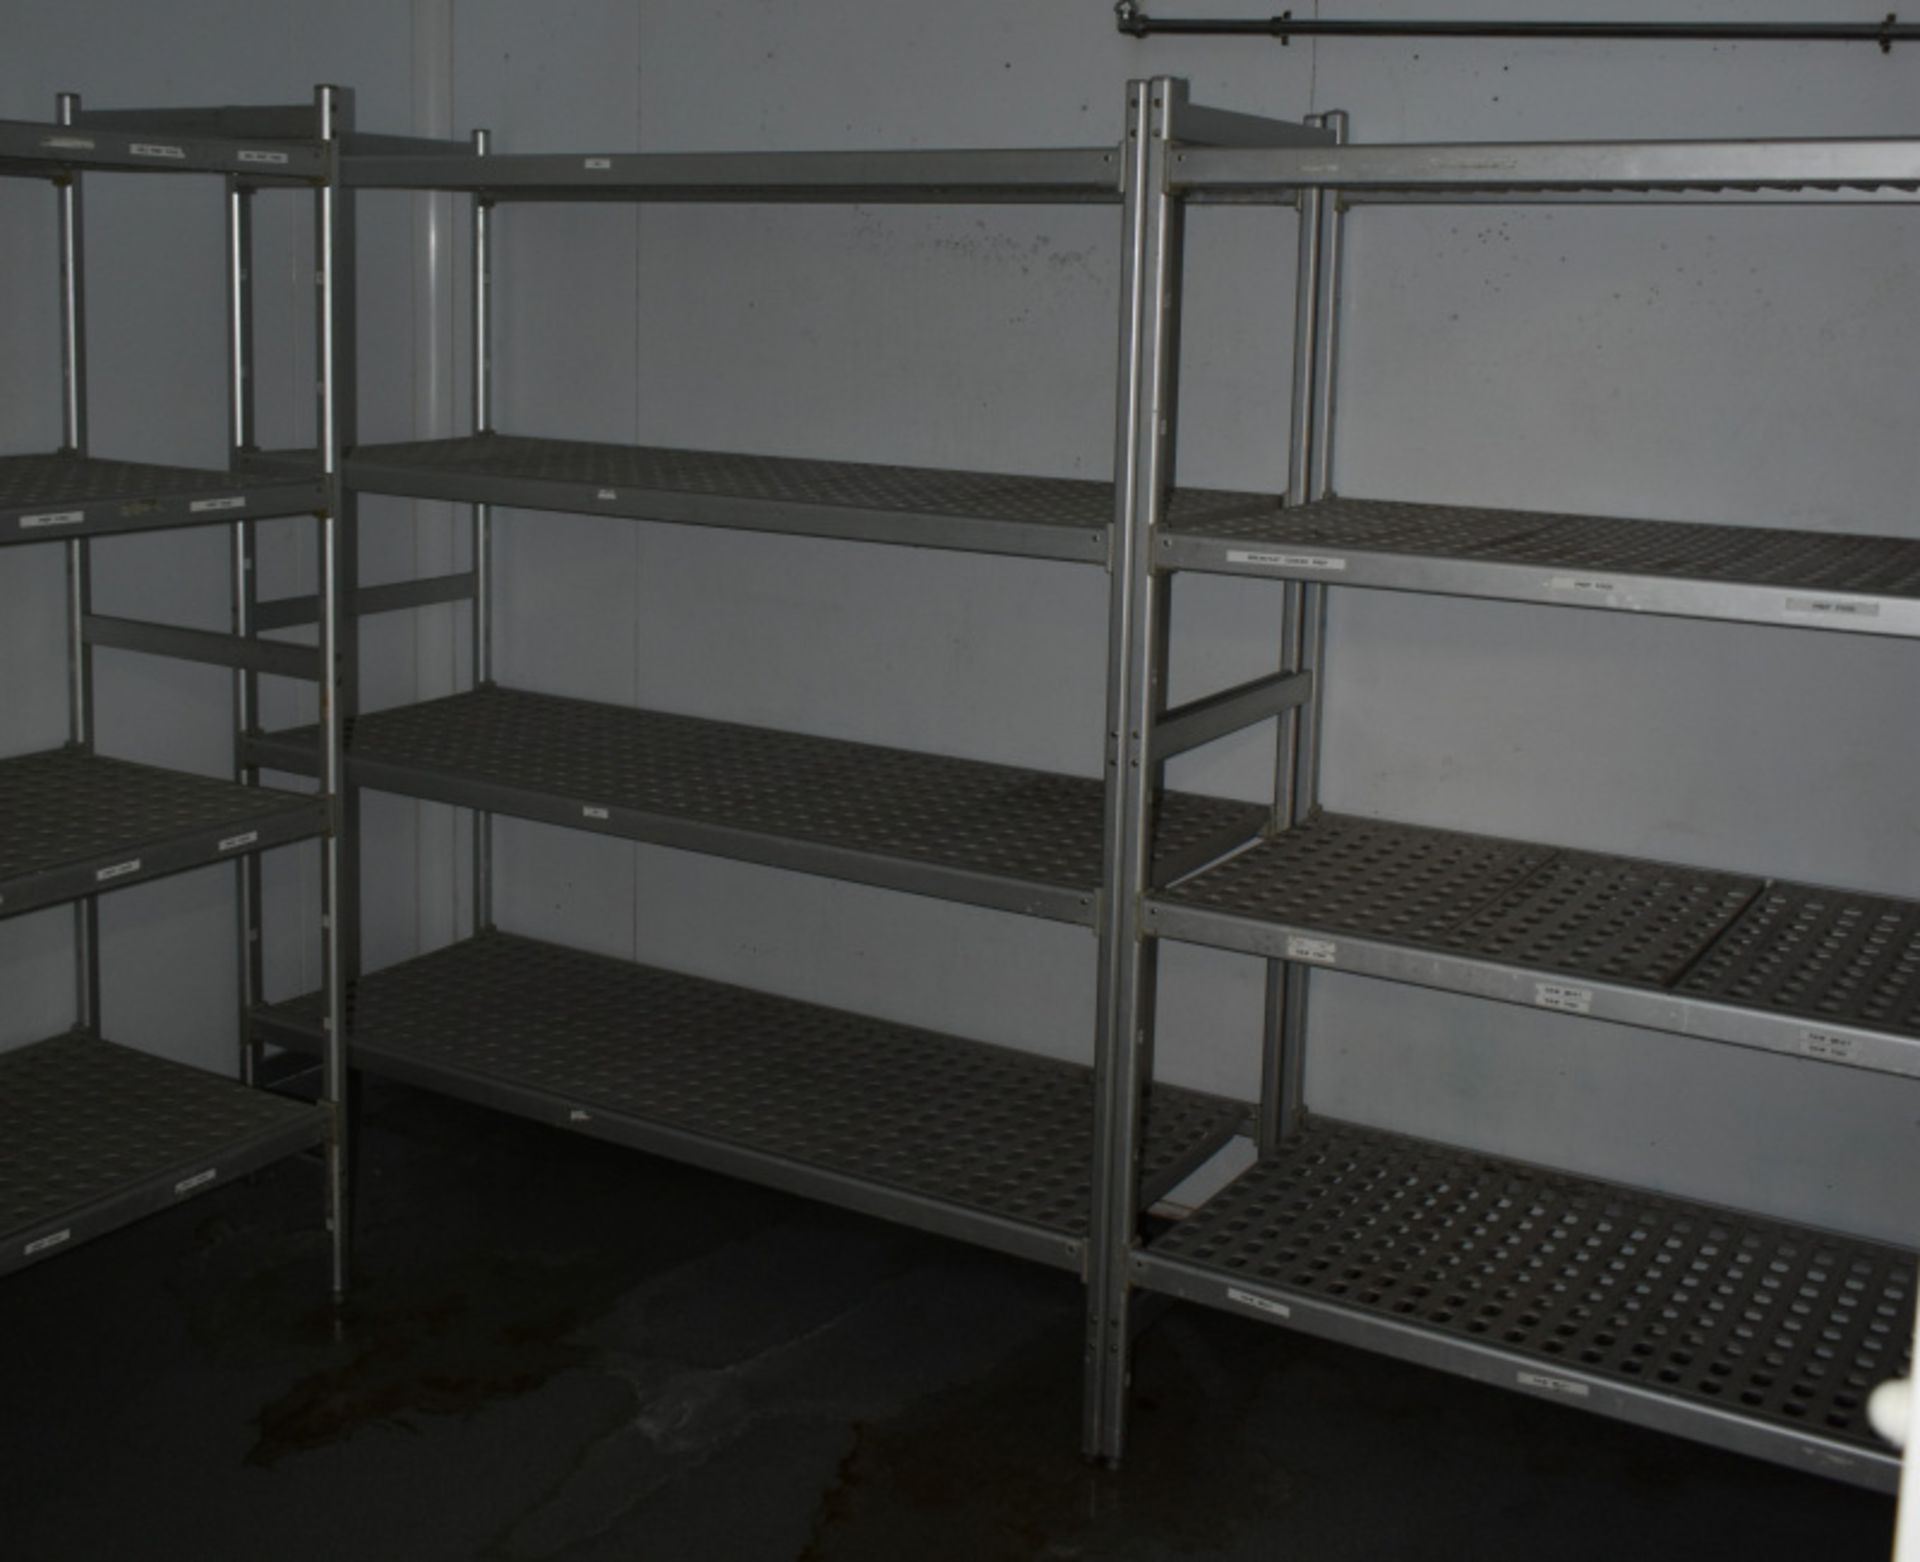 5 x Various sized 4 tier kitchen racking. 3 x Four tier kitchen racking L 1570mm x W 580mm - Image 3 of 4